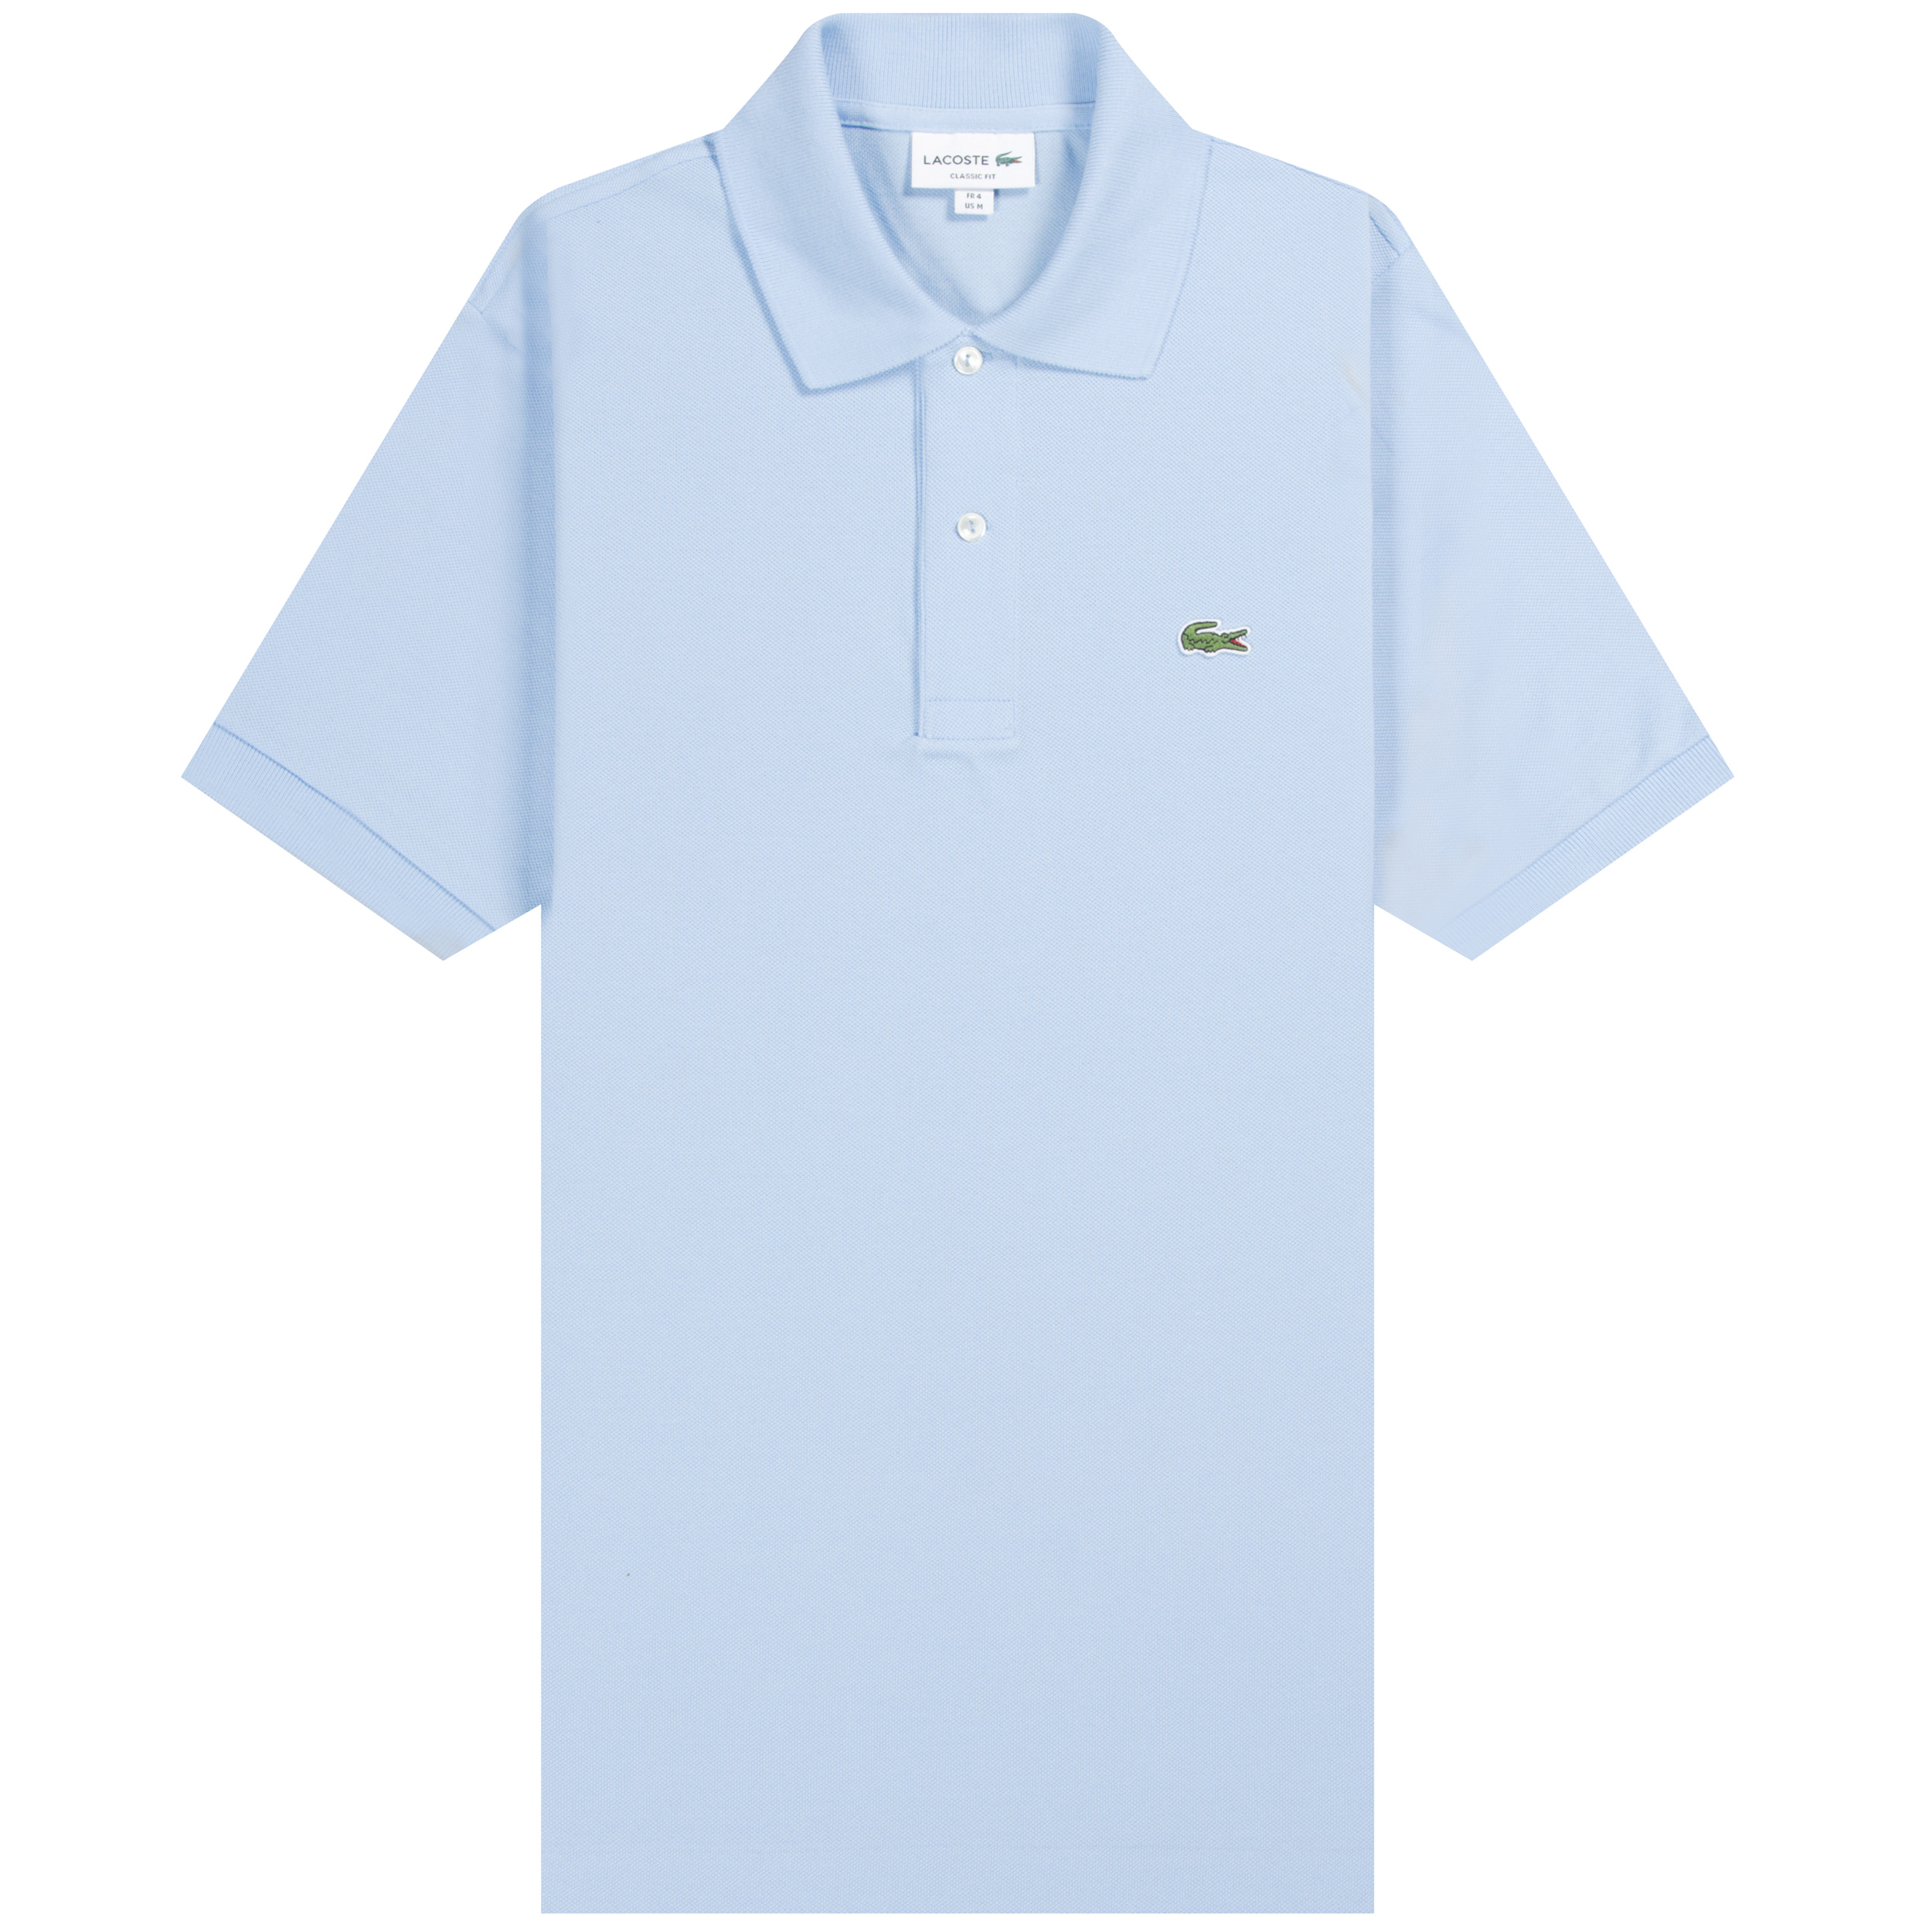 Lacoste ’Monogram Patterned’ Polo Shirt